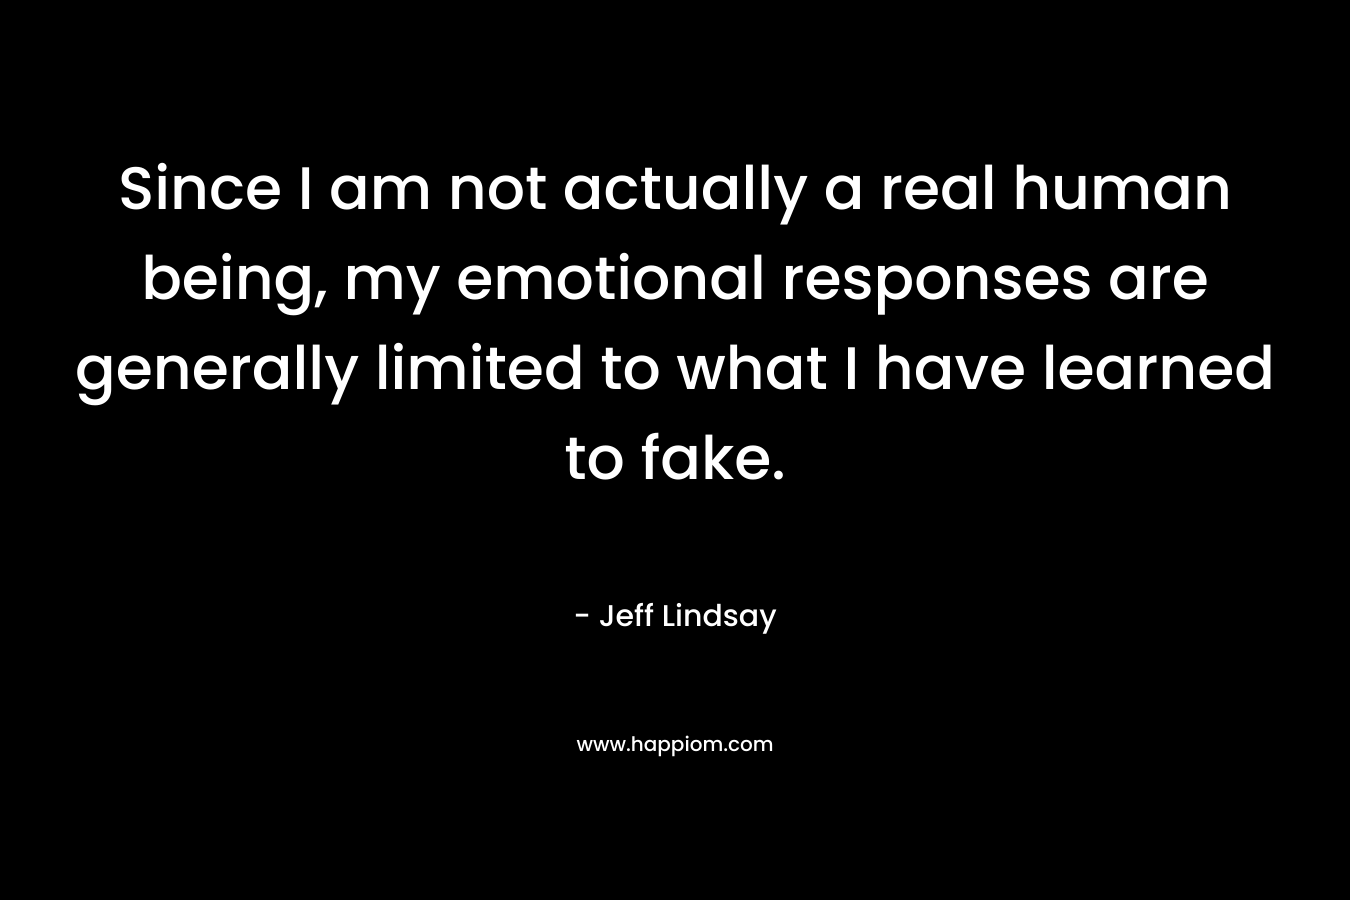 Since I am not actually a real human being, my emotional responses are generally limited to what I have learned to fake.